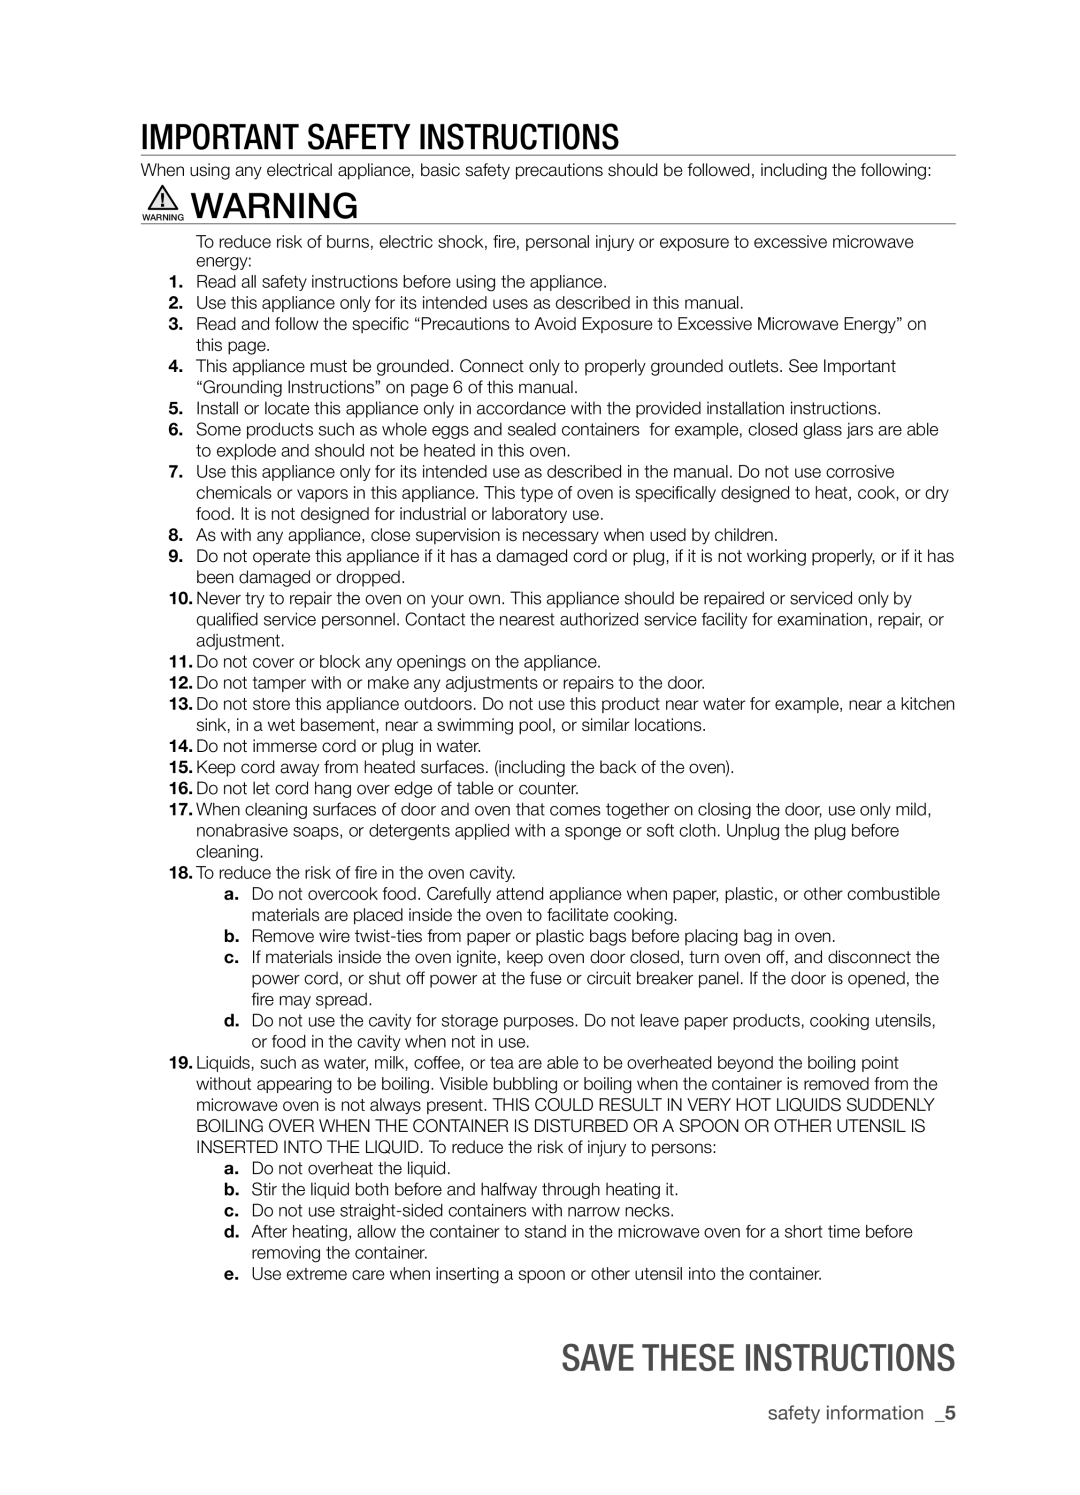 Samsung SMH9151B user manual Important Safety Instructions, Save these instructions, safety information 